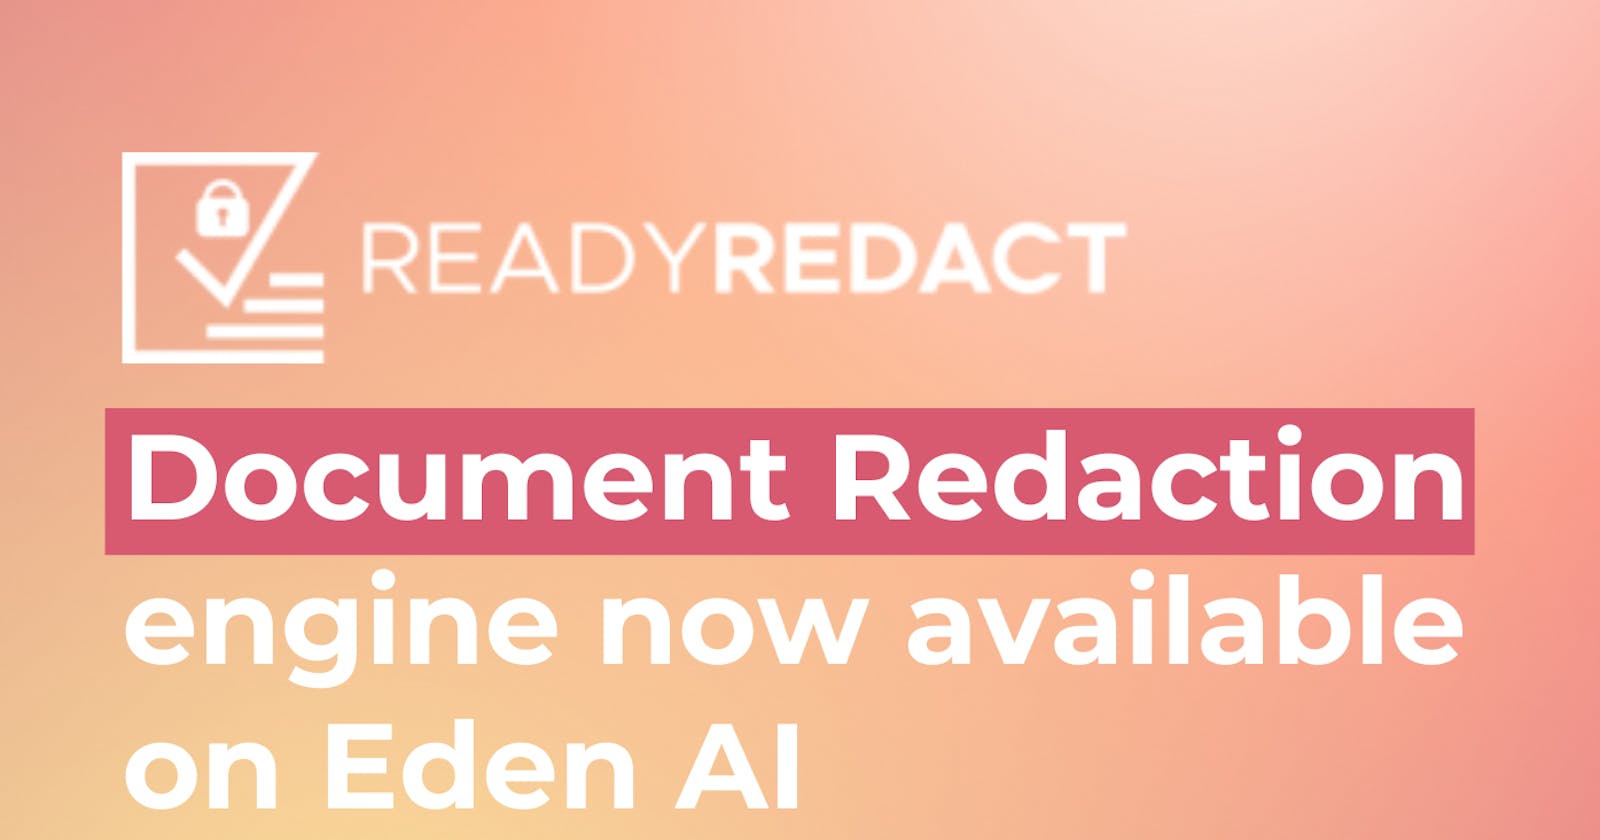 ReadyRedact Document Redaction engine is available on Eden AI